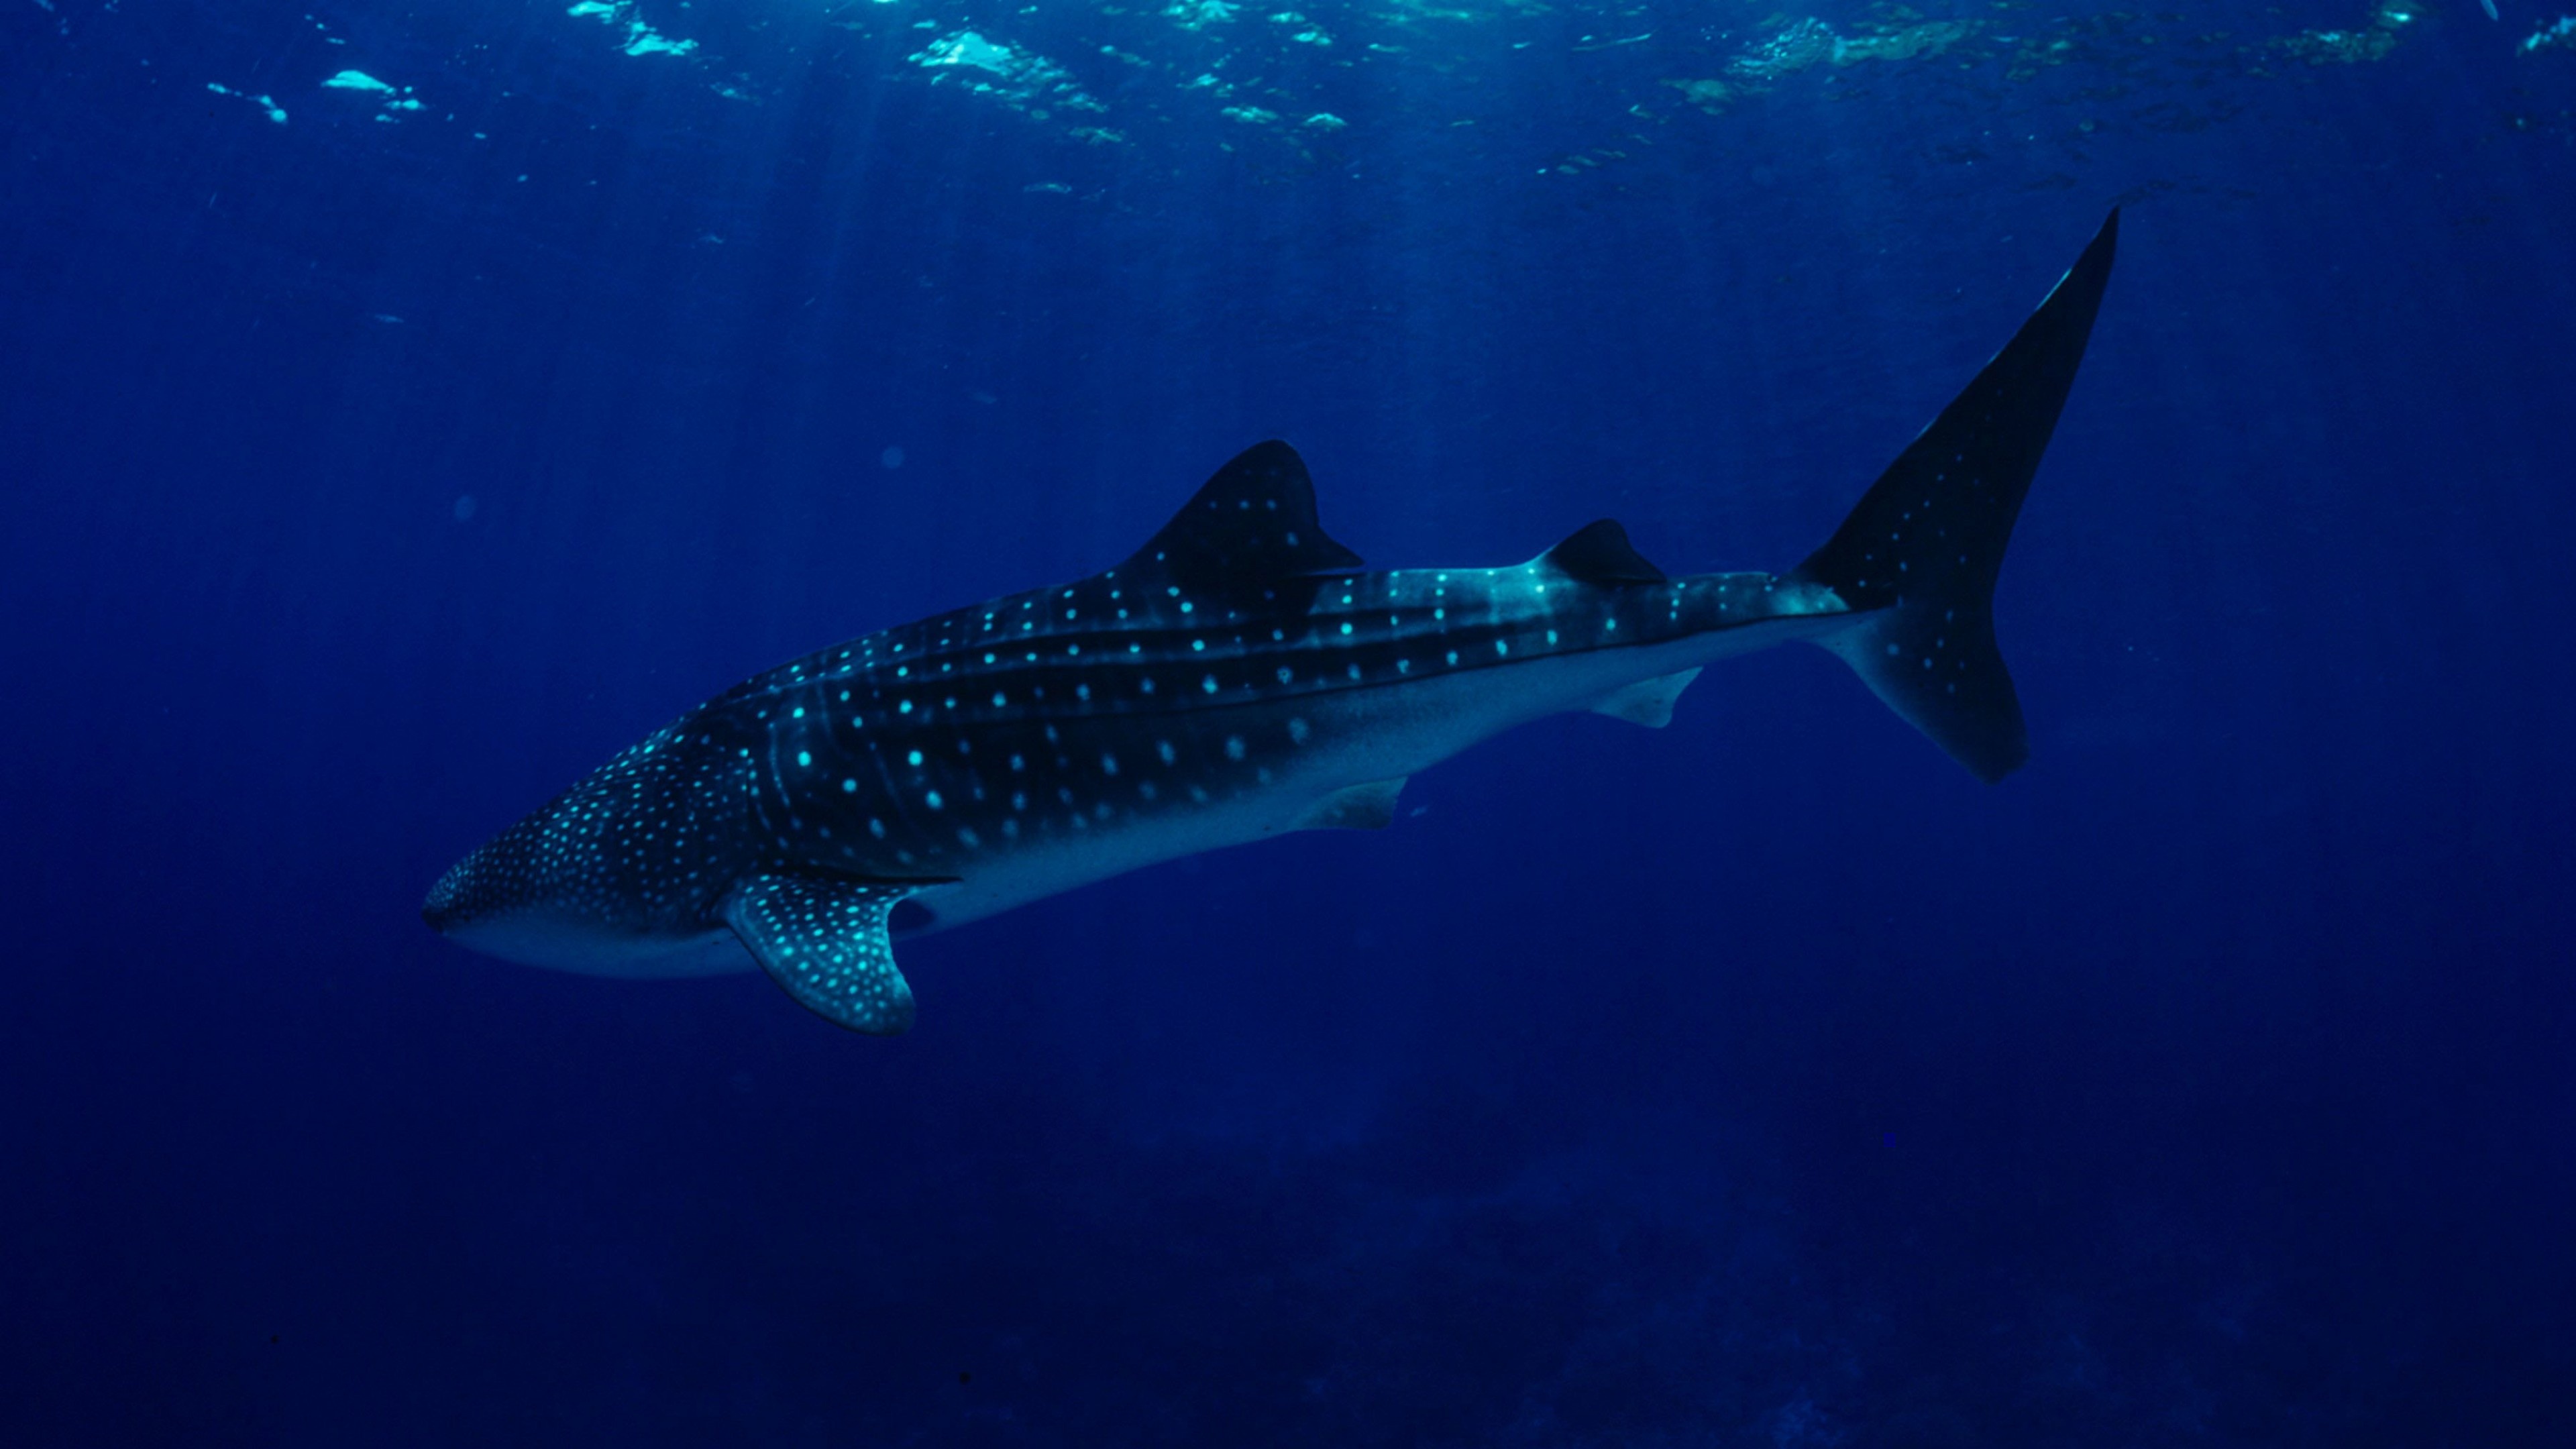 Philippines south china sea, Whale sharks, Diving underwater, Blue sea, 3840x2160 4K Desktop